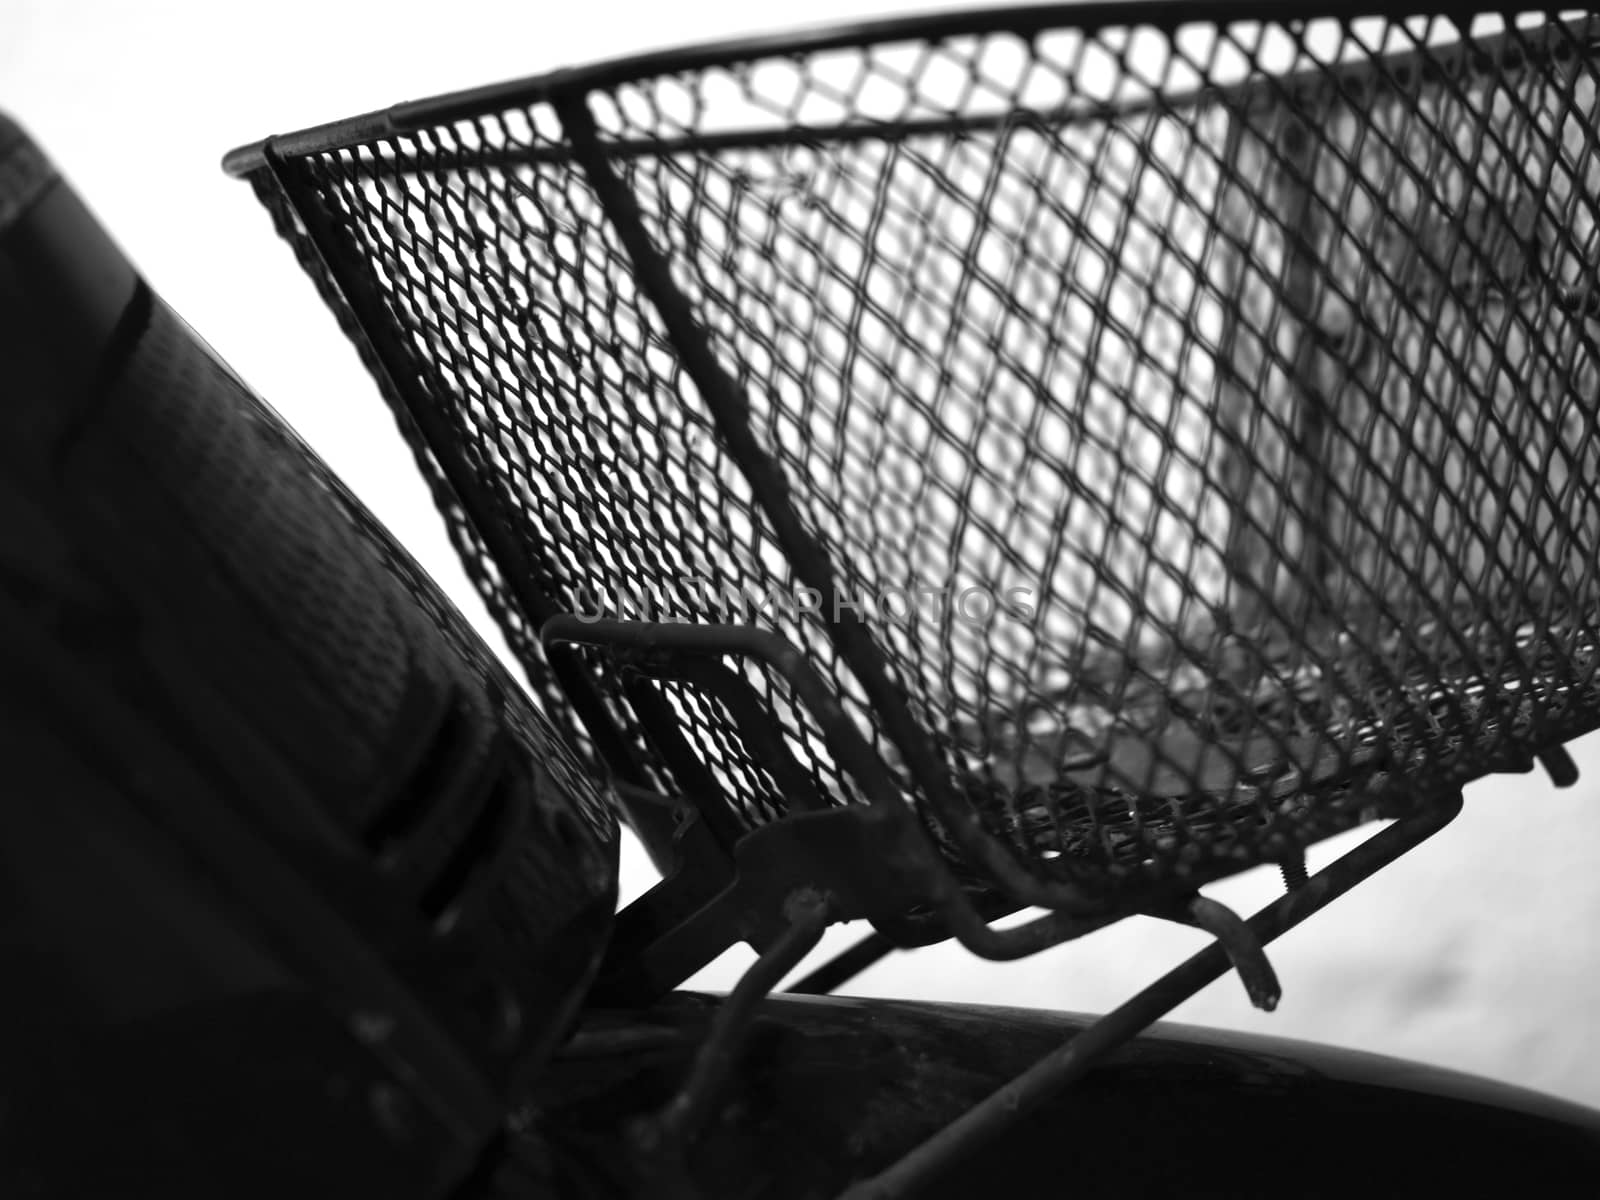 BLACK AND WHITE PHOTO OF BLURRY SHOT OF MOTORCYCLE FRONT METAL BASKET